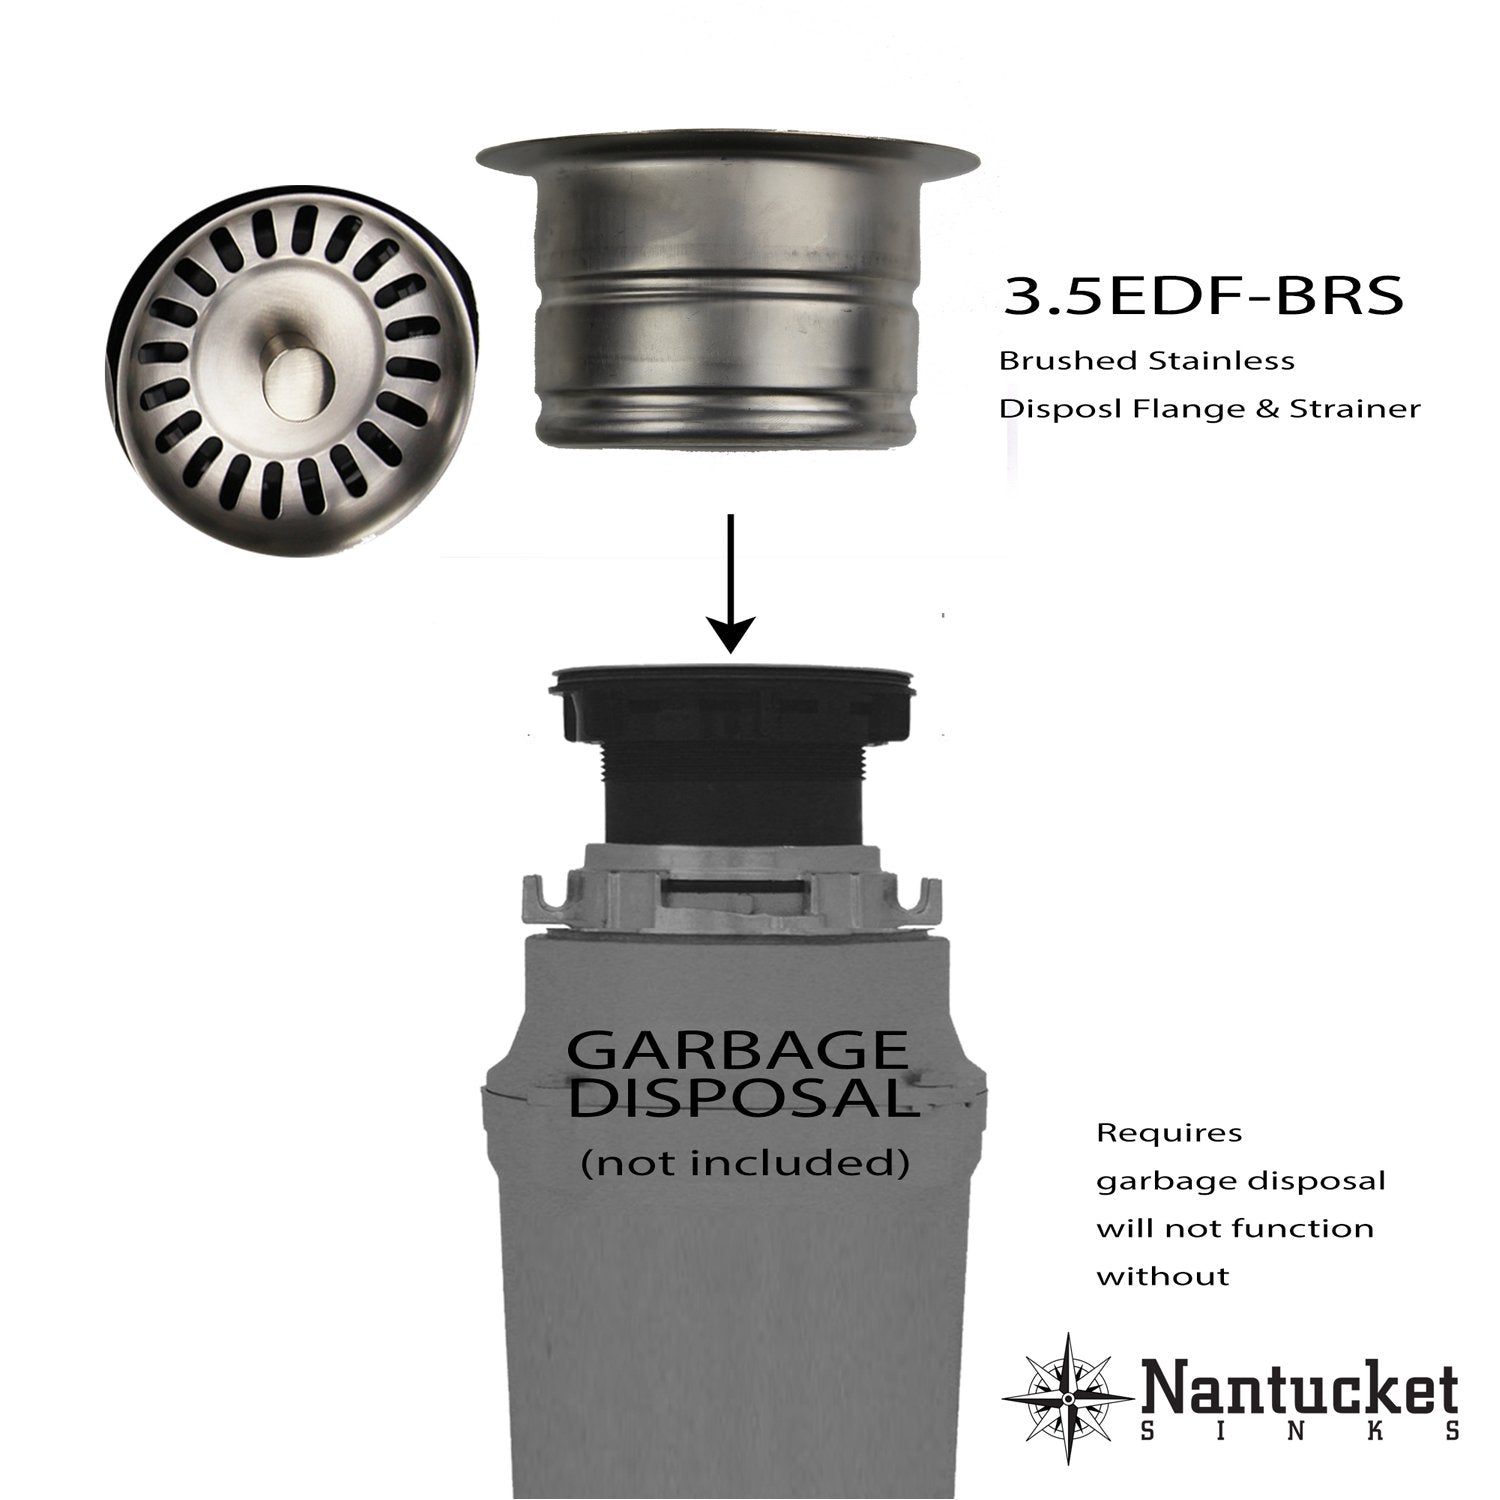 Nantucket Sink 3.5" Extended Flange Disposal Kitchen Drain in Brushed Stainless